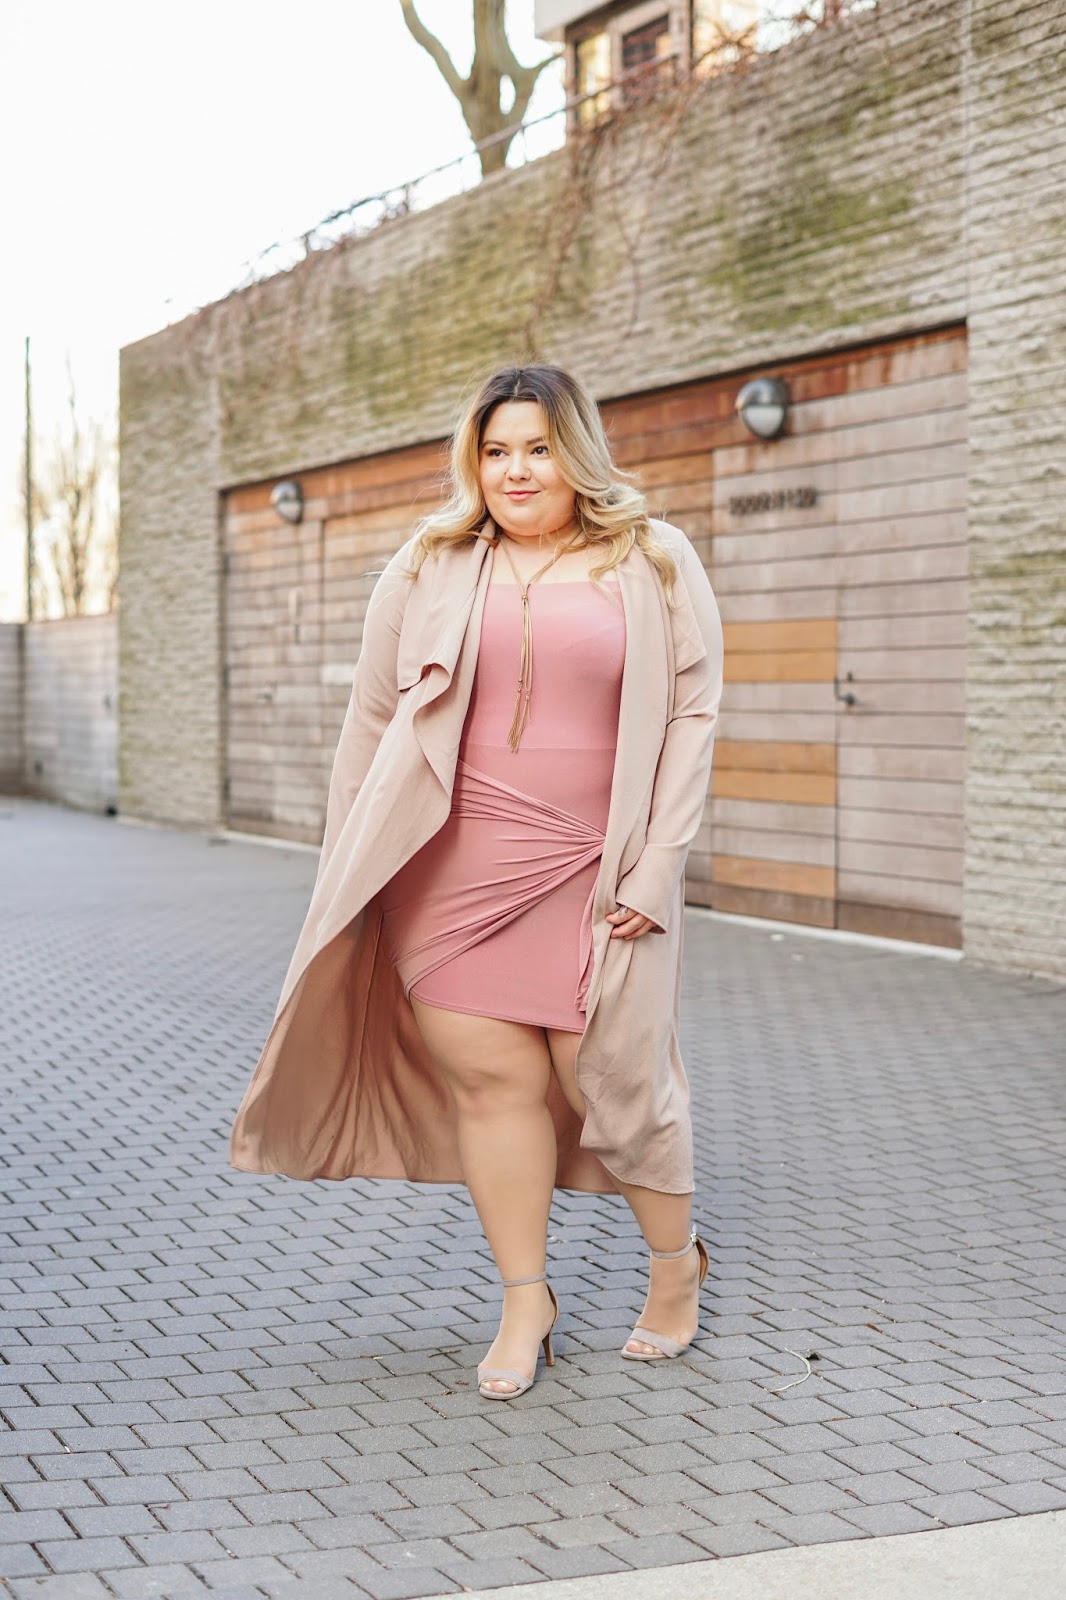 natalie Craig, natalie in the city, Chicago fashion blogger, plus size fashion blogger, Chicago model, petite plus size fashion, petite plus size model, chi town, affordable plus size fashion, curvy girls, fashion nova curve, fashion nova, mauve, plus size mini dress, trench coat, sexy plus size fashion, size 16, size 18